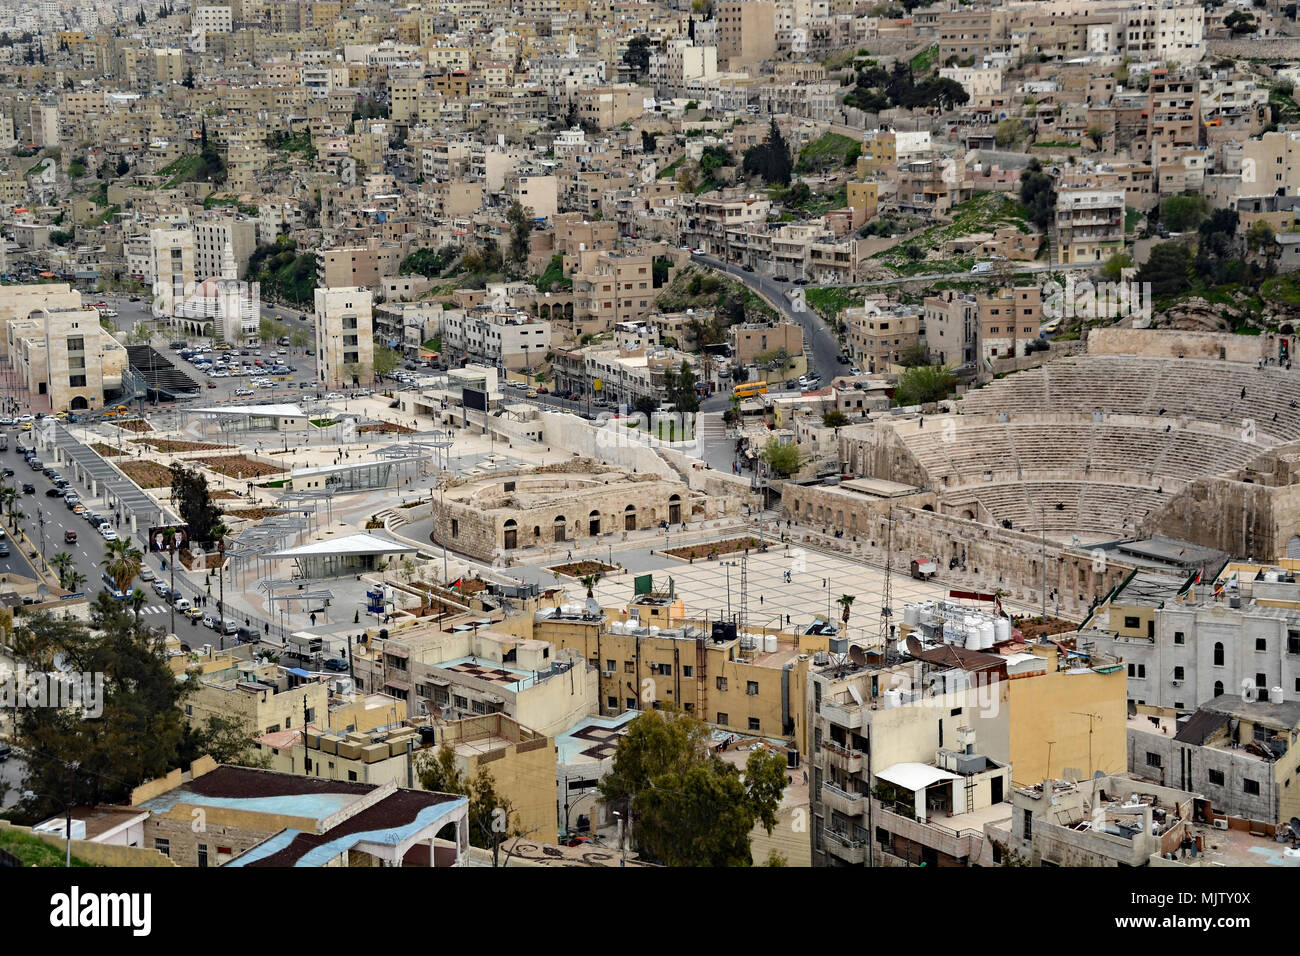 View of the Roman ruins from the Citadel in the old part of Amman, Jordan. Stock Photo